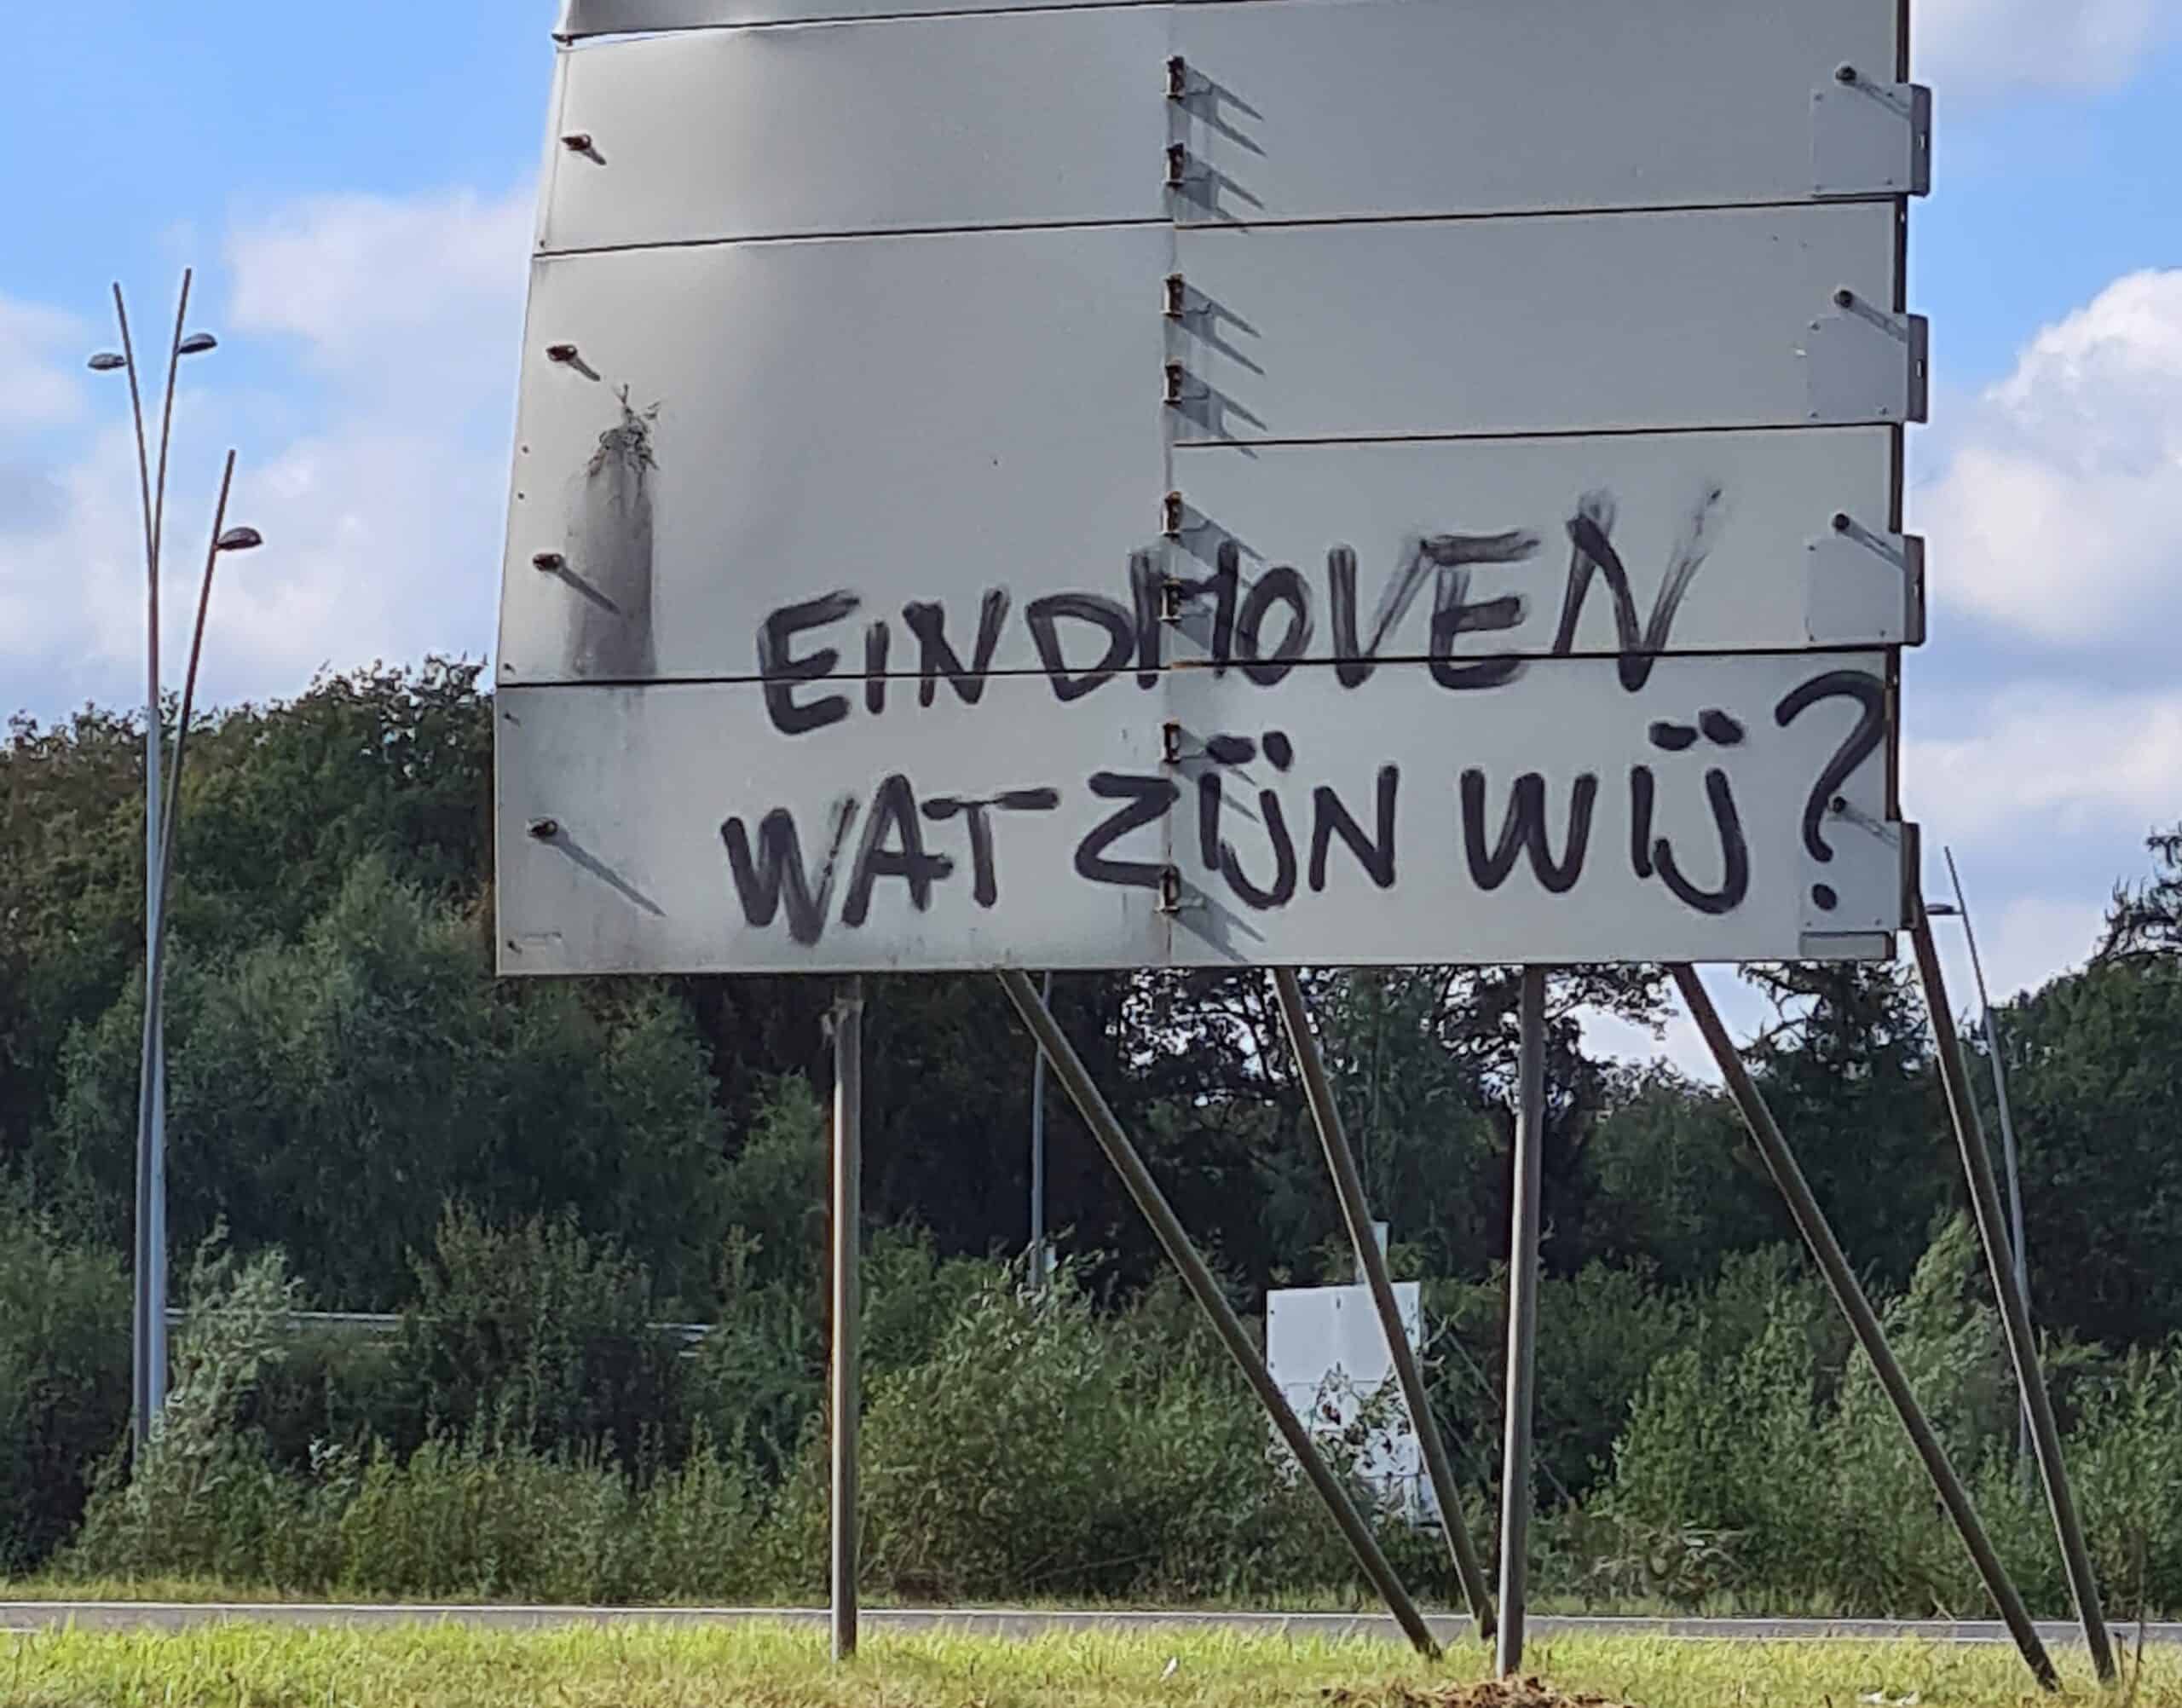 Eindhoven, what are we?